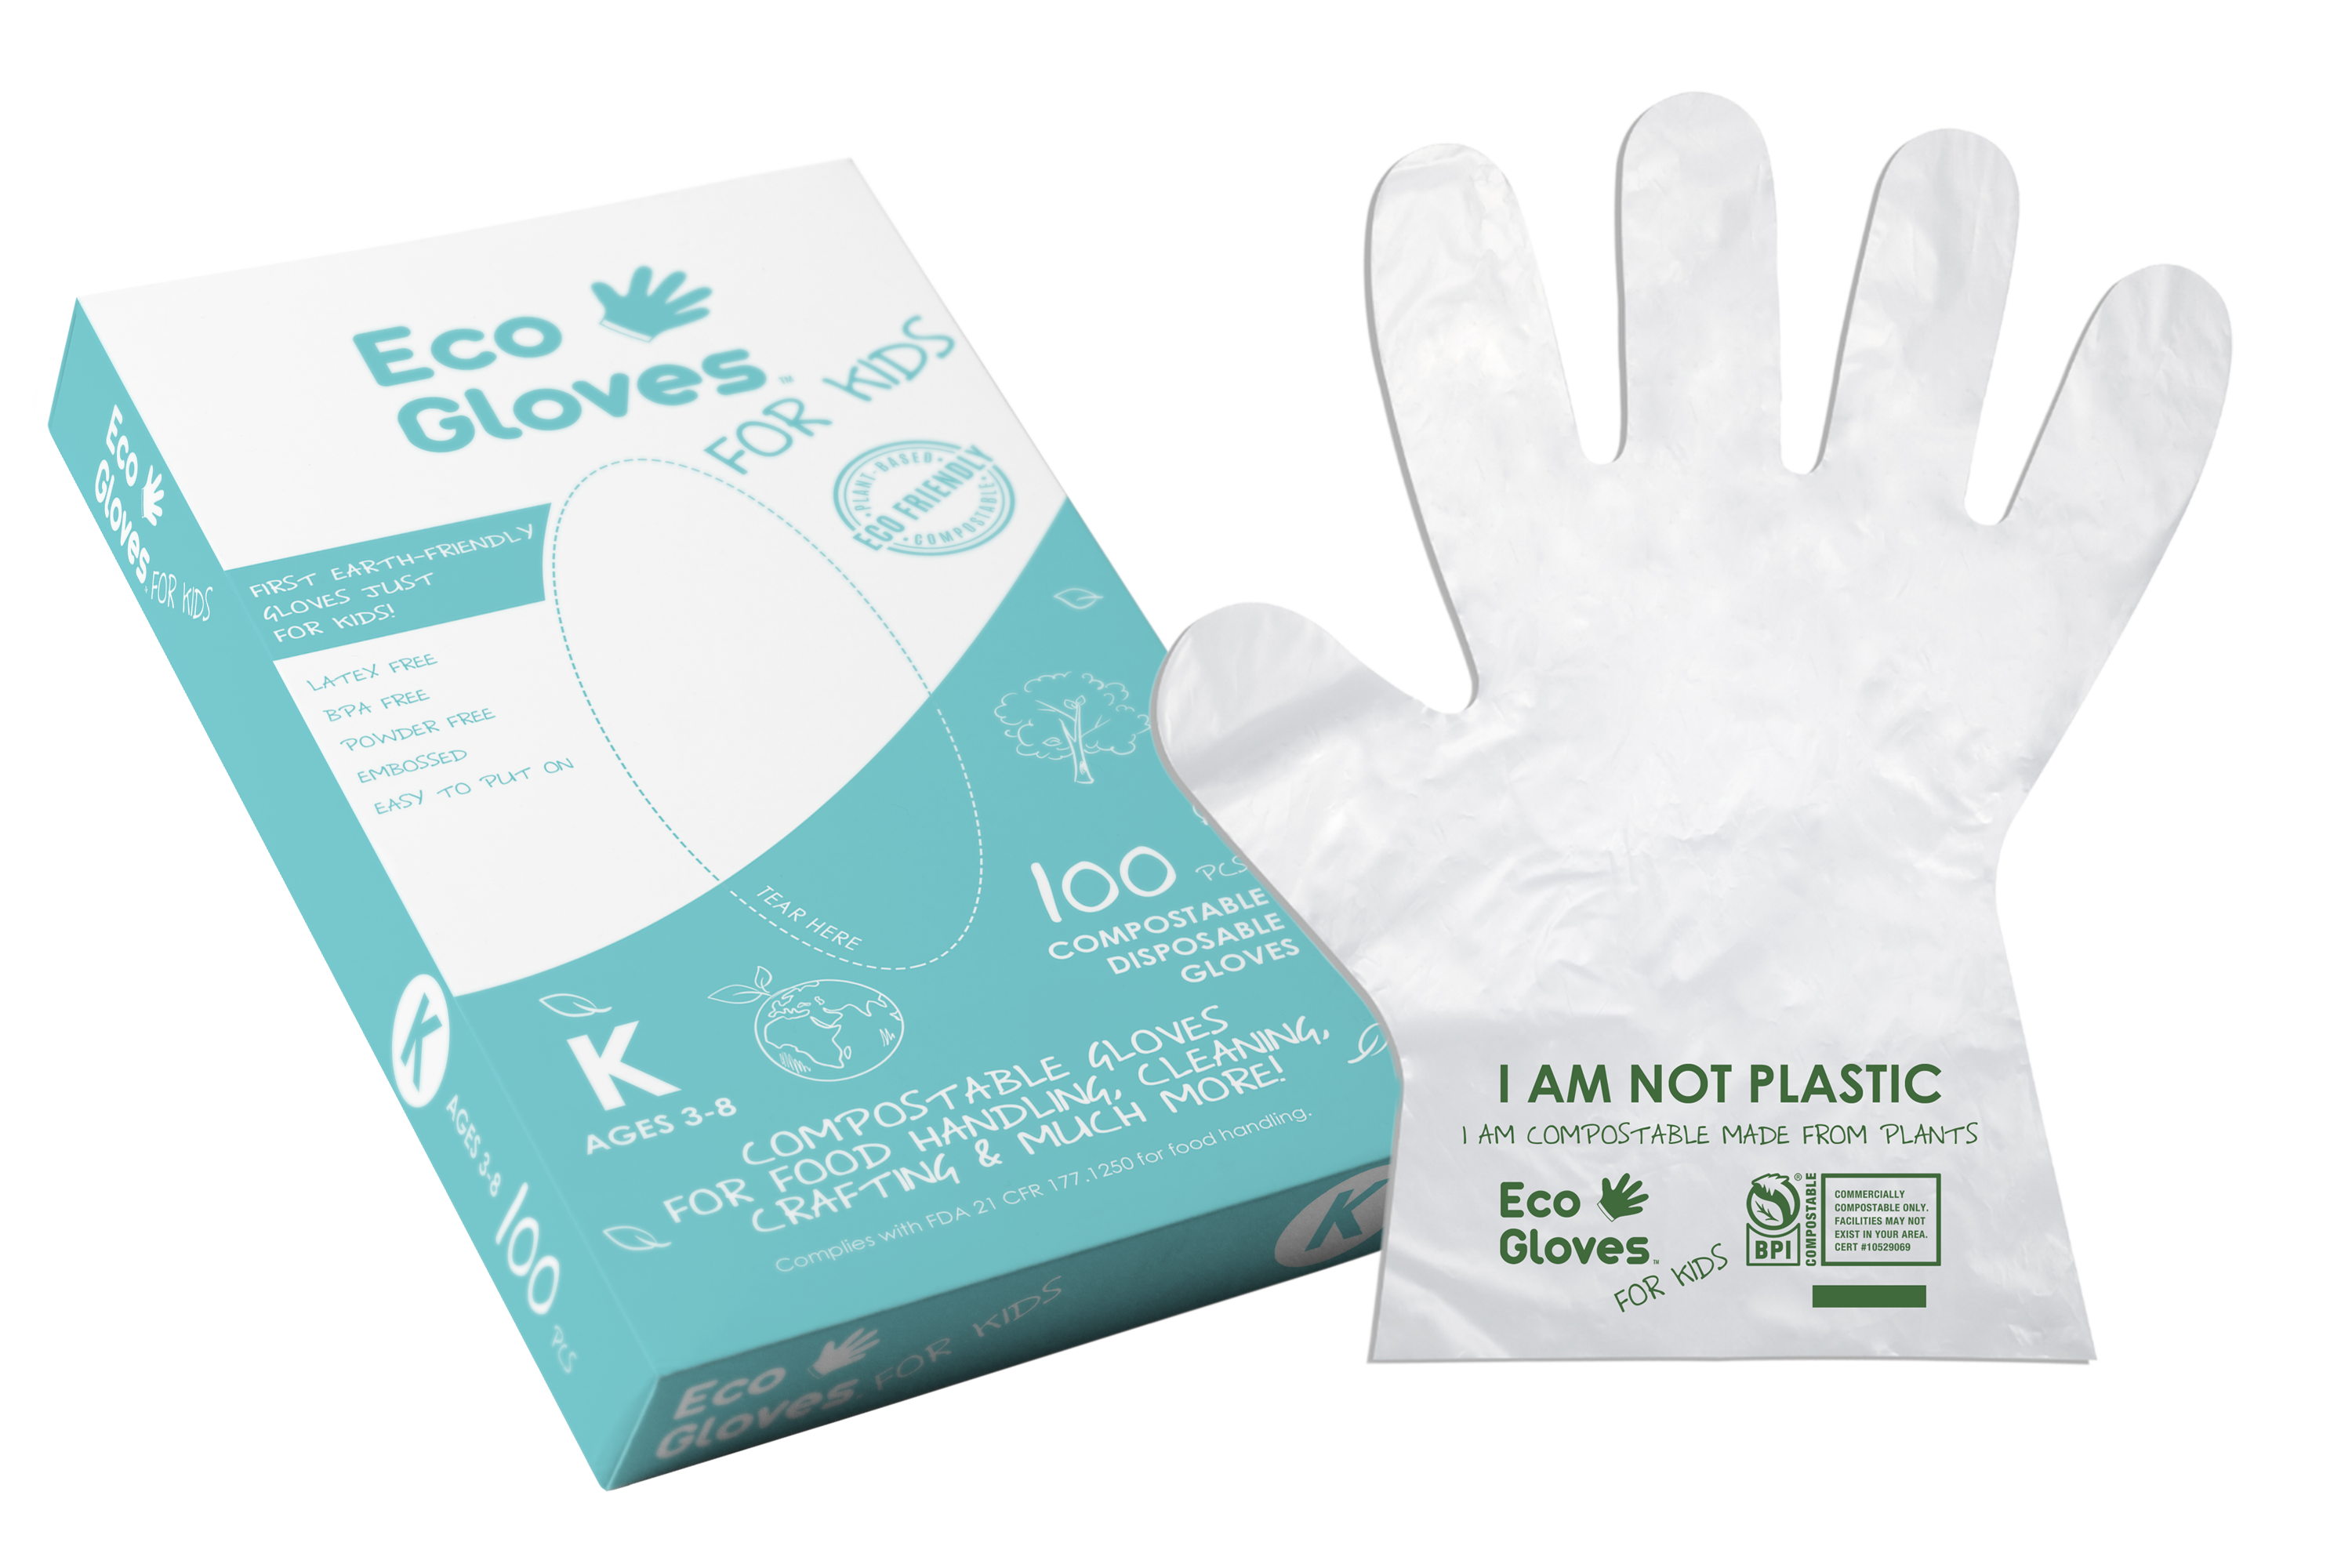 Disposable Eco-Friendly Compostable Gloves (100 gloves/box)